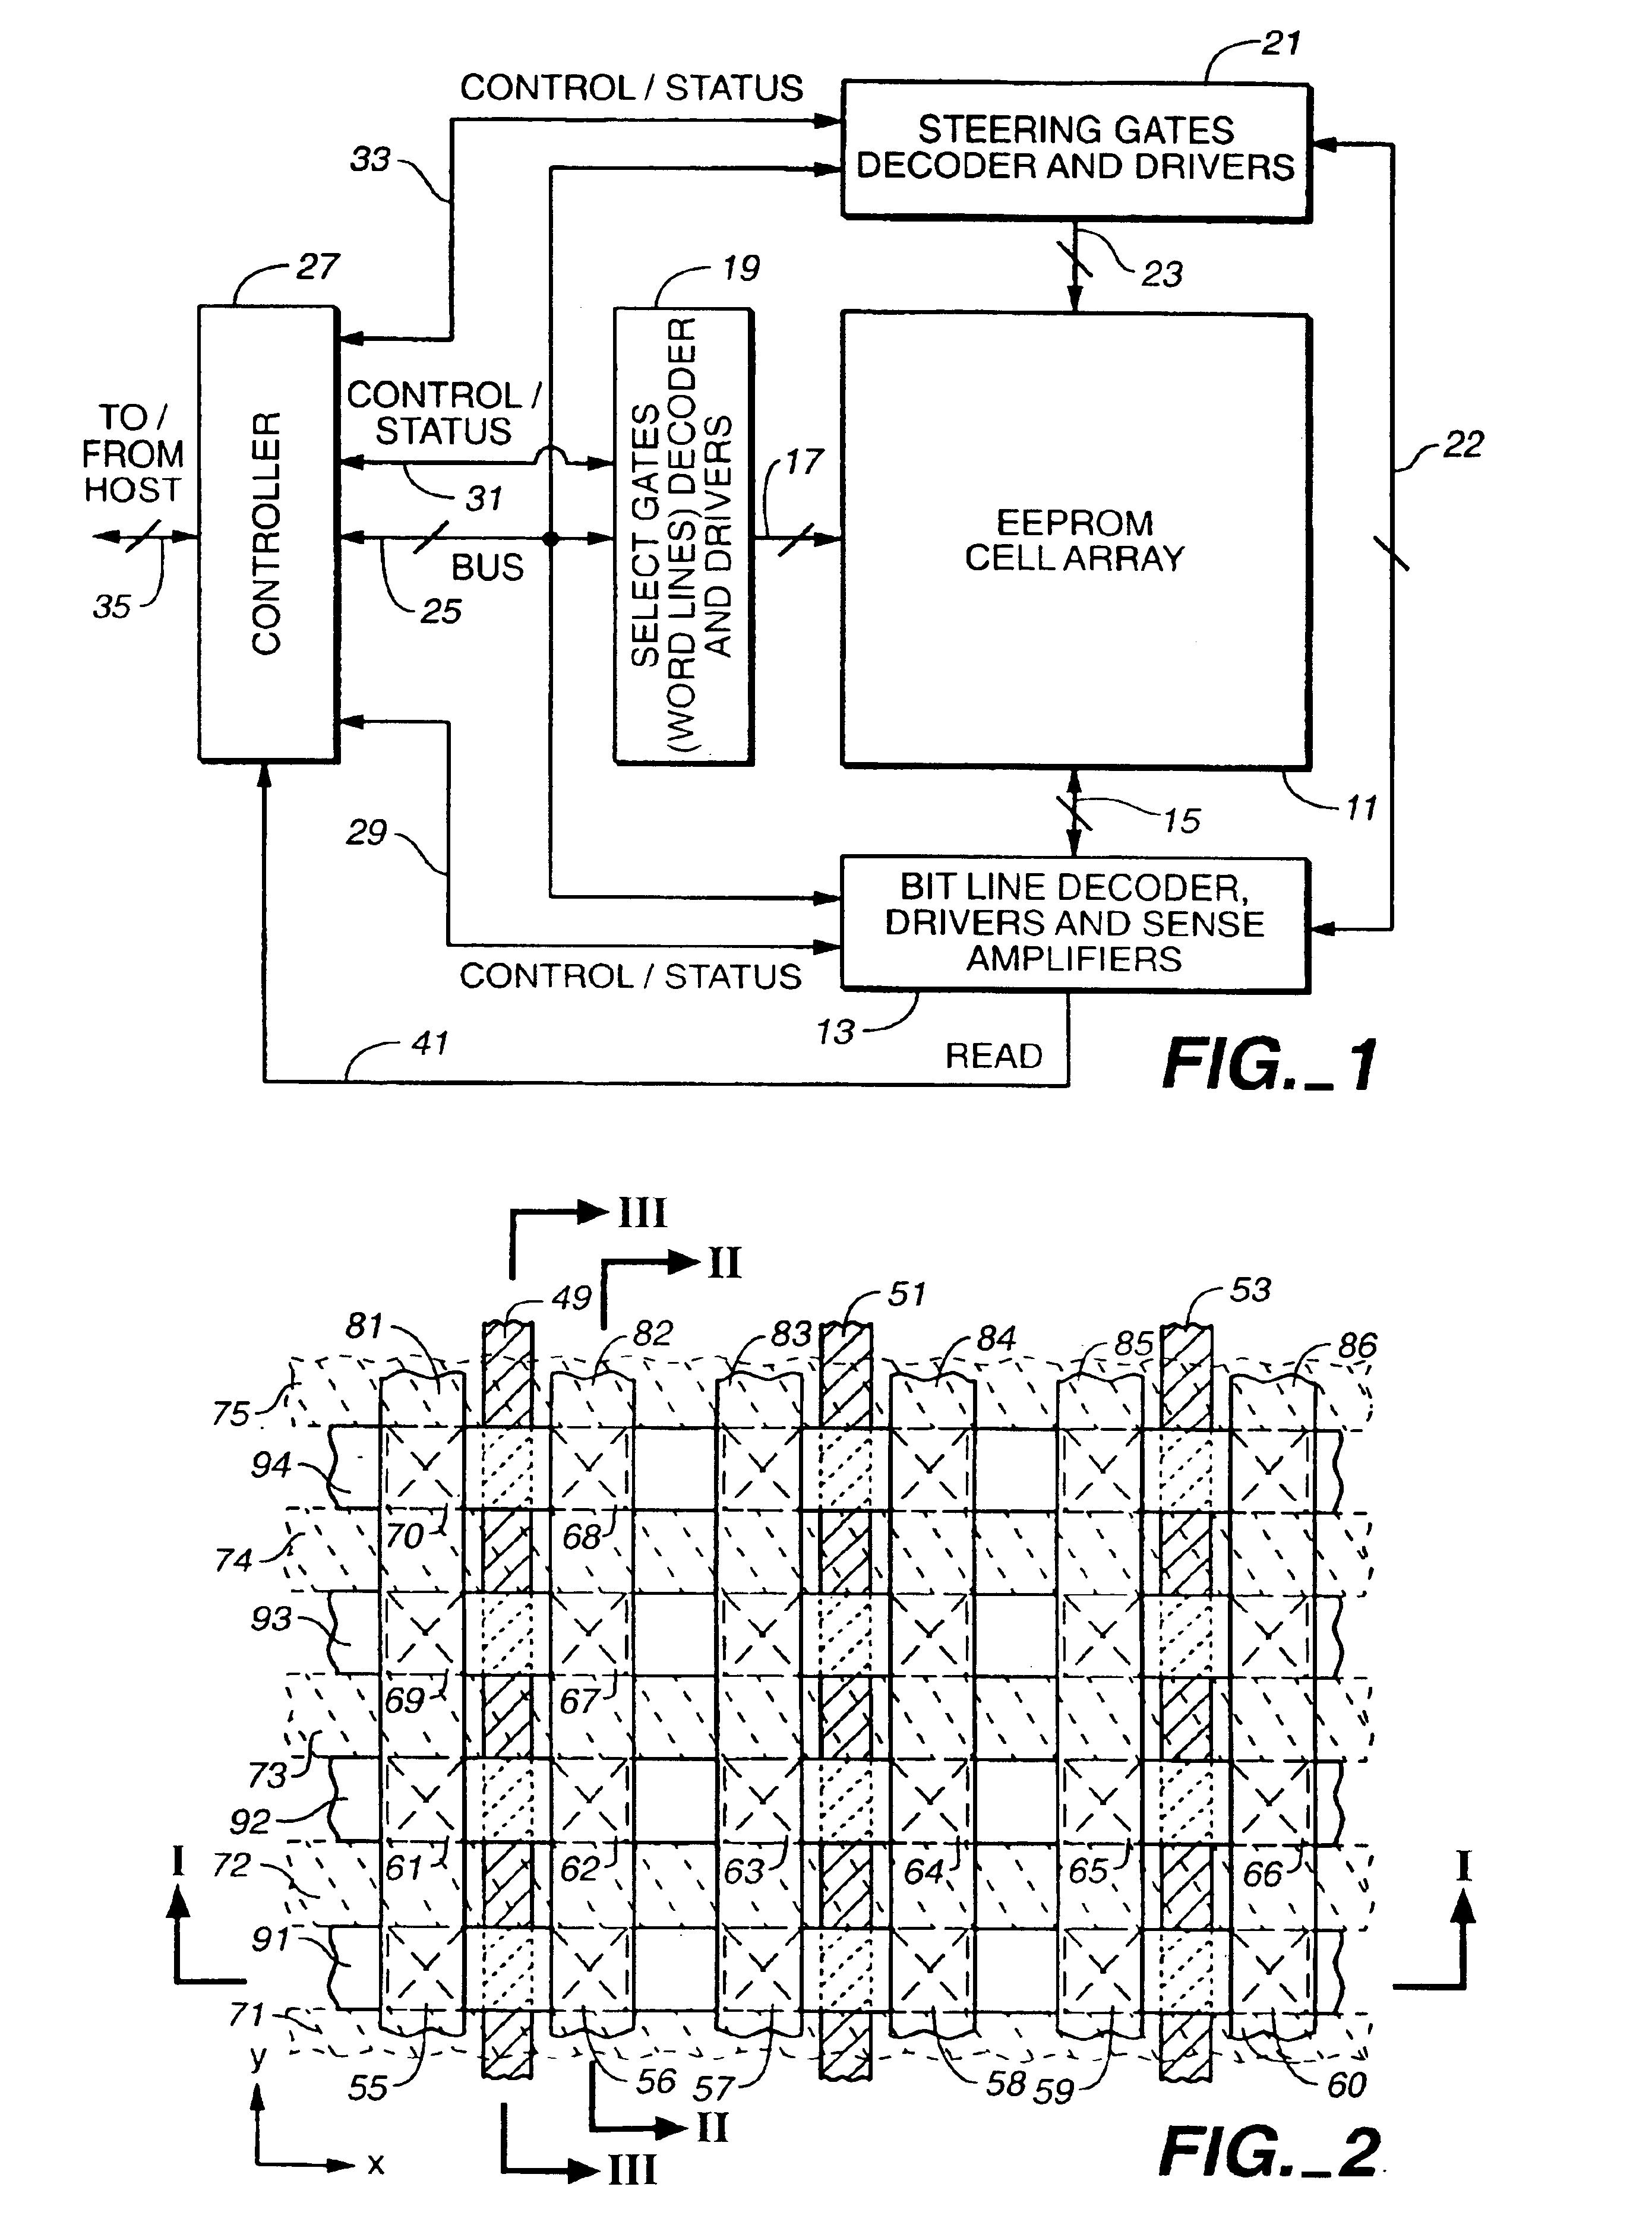 Non-volatile memory cell array having discontinuous source and drain diffusions contacted by continuous bit line conductors and methods of forming